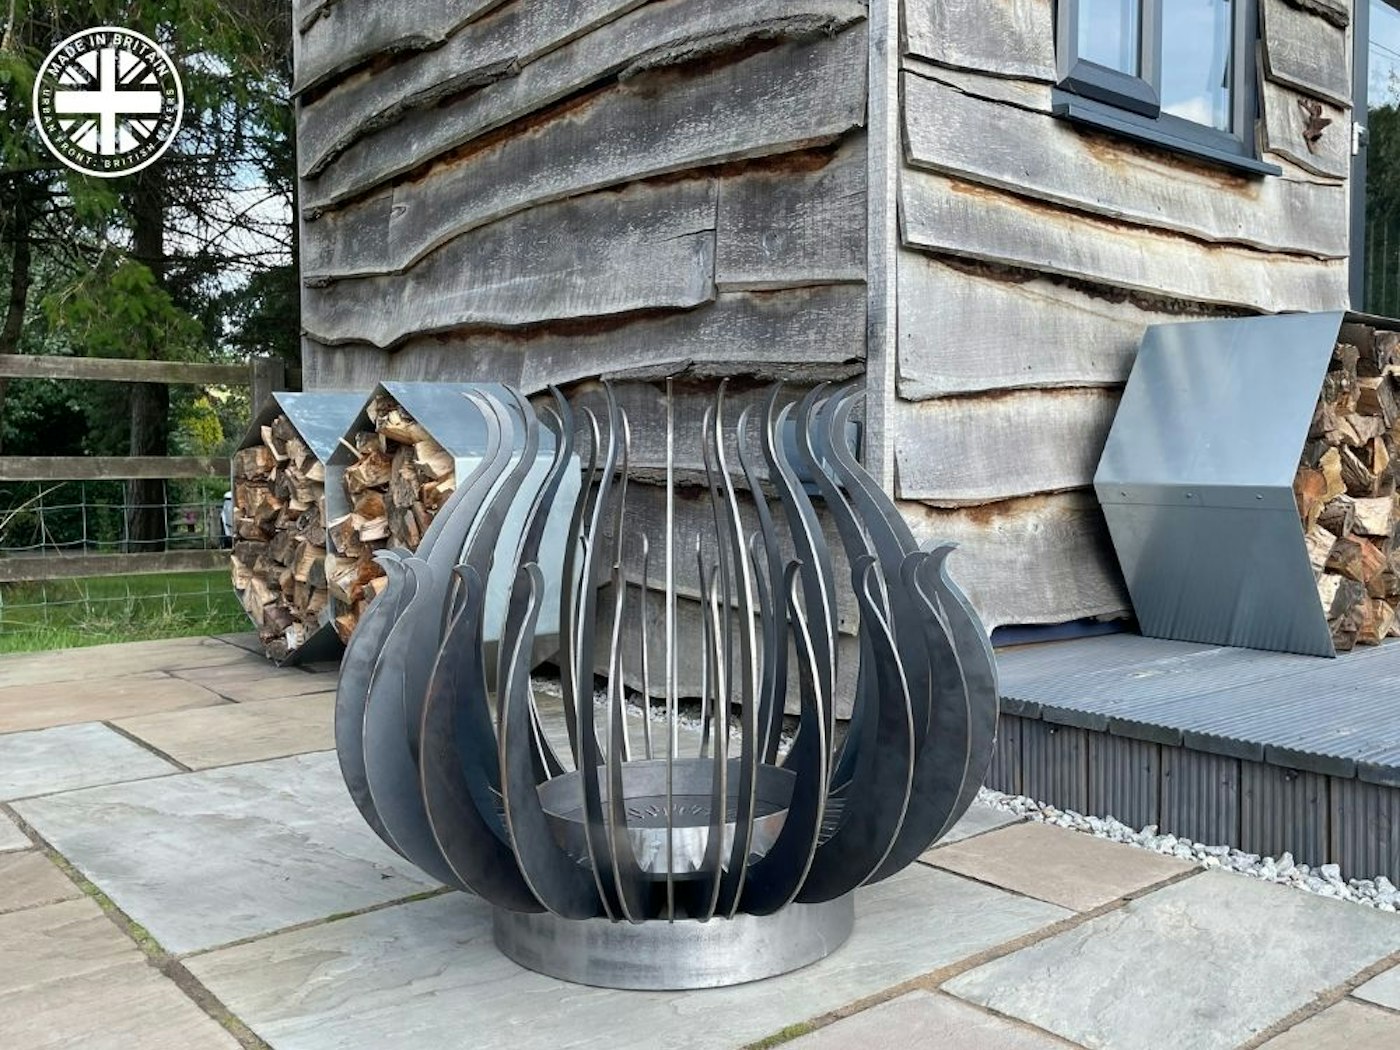 The Thistle firepit's shape takes inspiration from flames and the thistle flower.